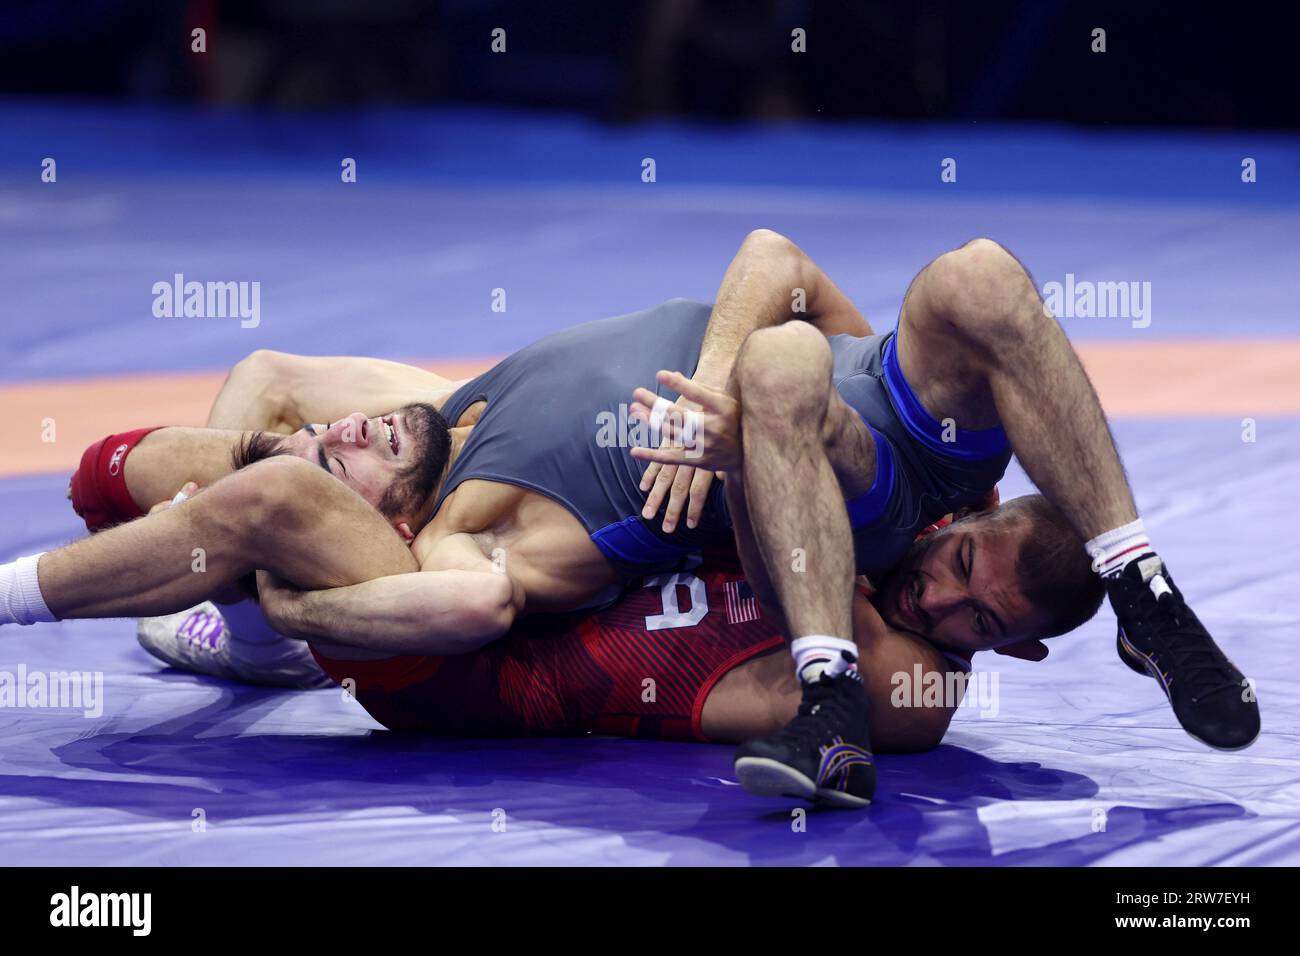 Vitali Arujau of United Stats (red) competes during the mens freestyle 61kg final match against Abasgadzhi Magomedov of Russia (blue) at the Wrestling World Championships in Belgrade, Serbia on September 17, 2023.